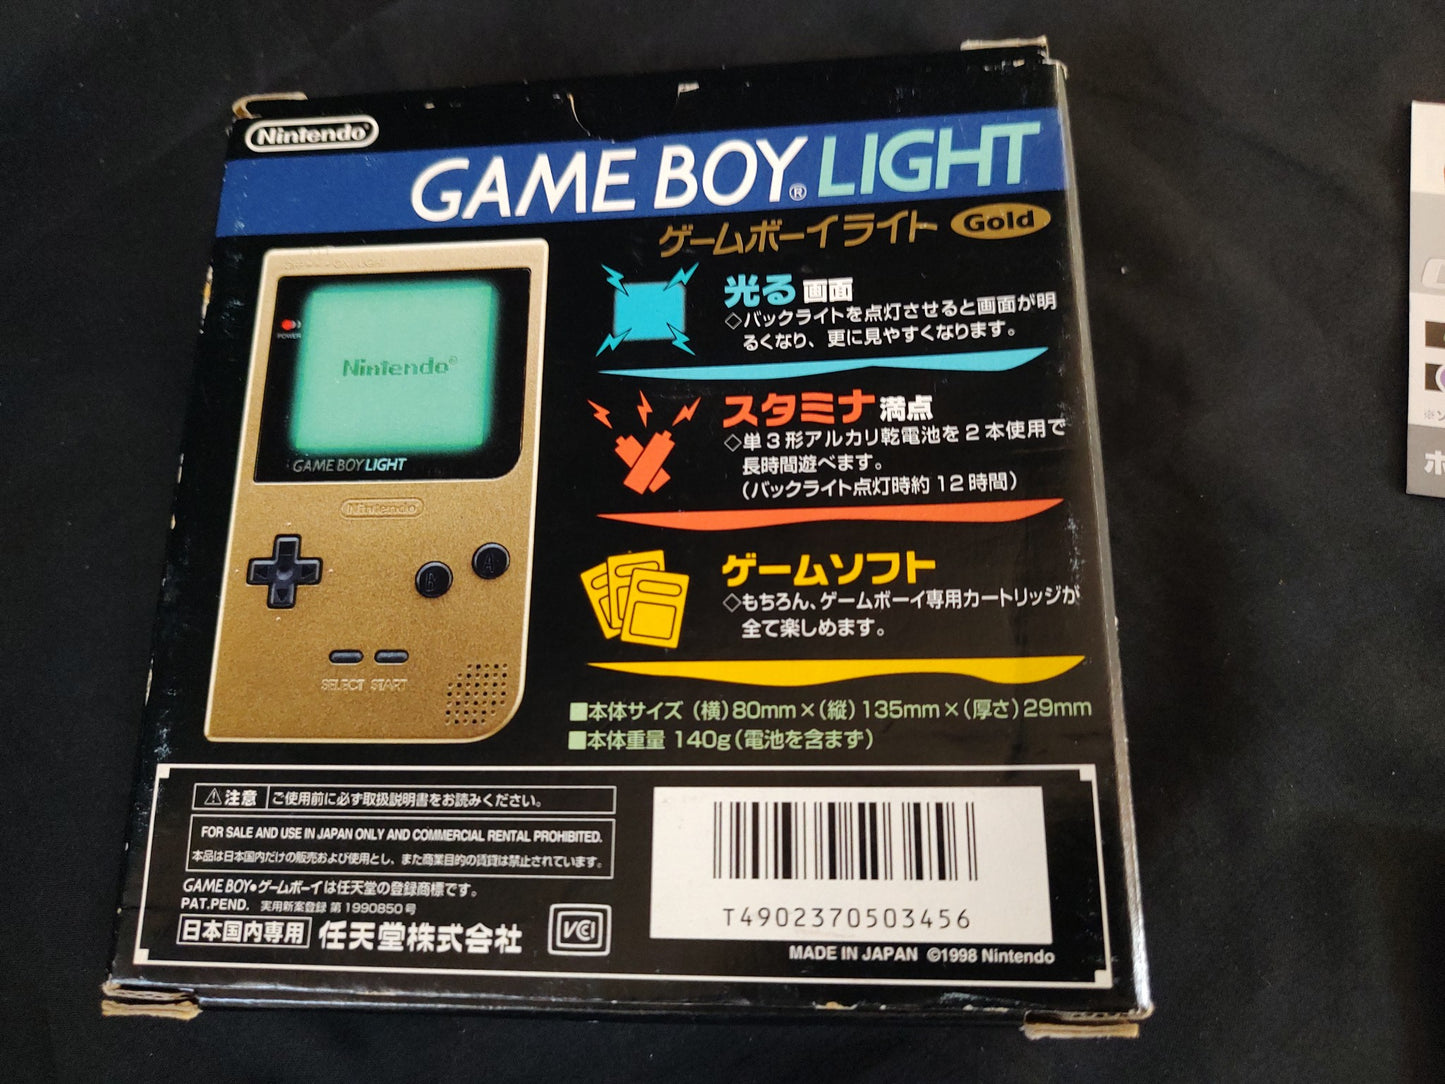 Nintendo Game boy Light Gold color console MGB-101,Manual, and box set-f0903-